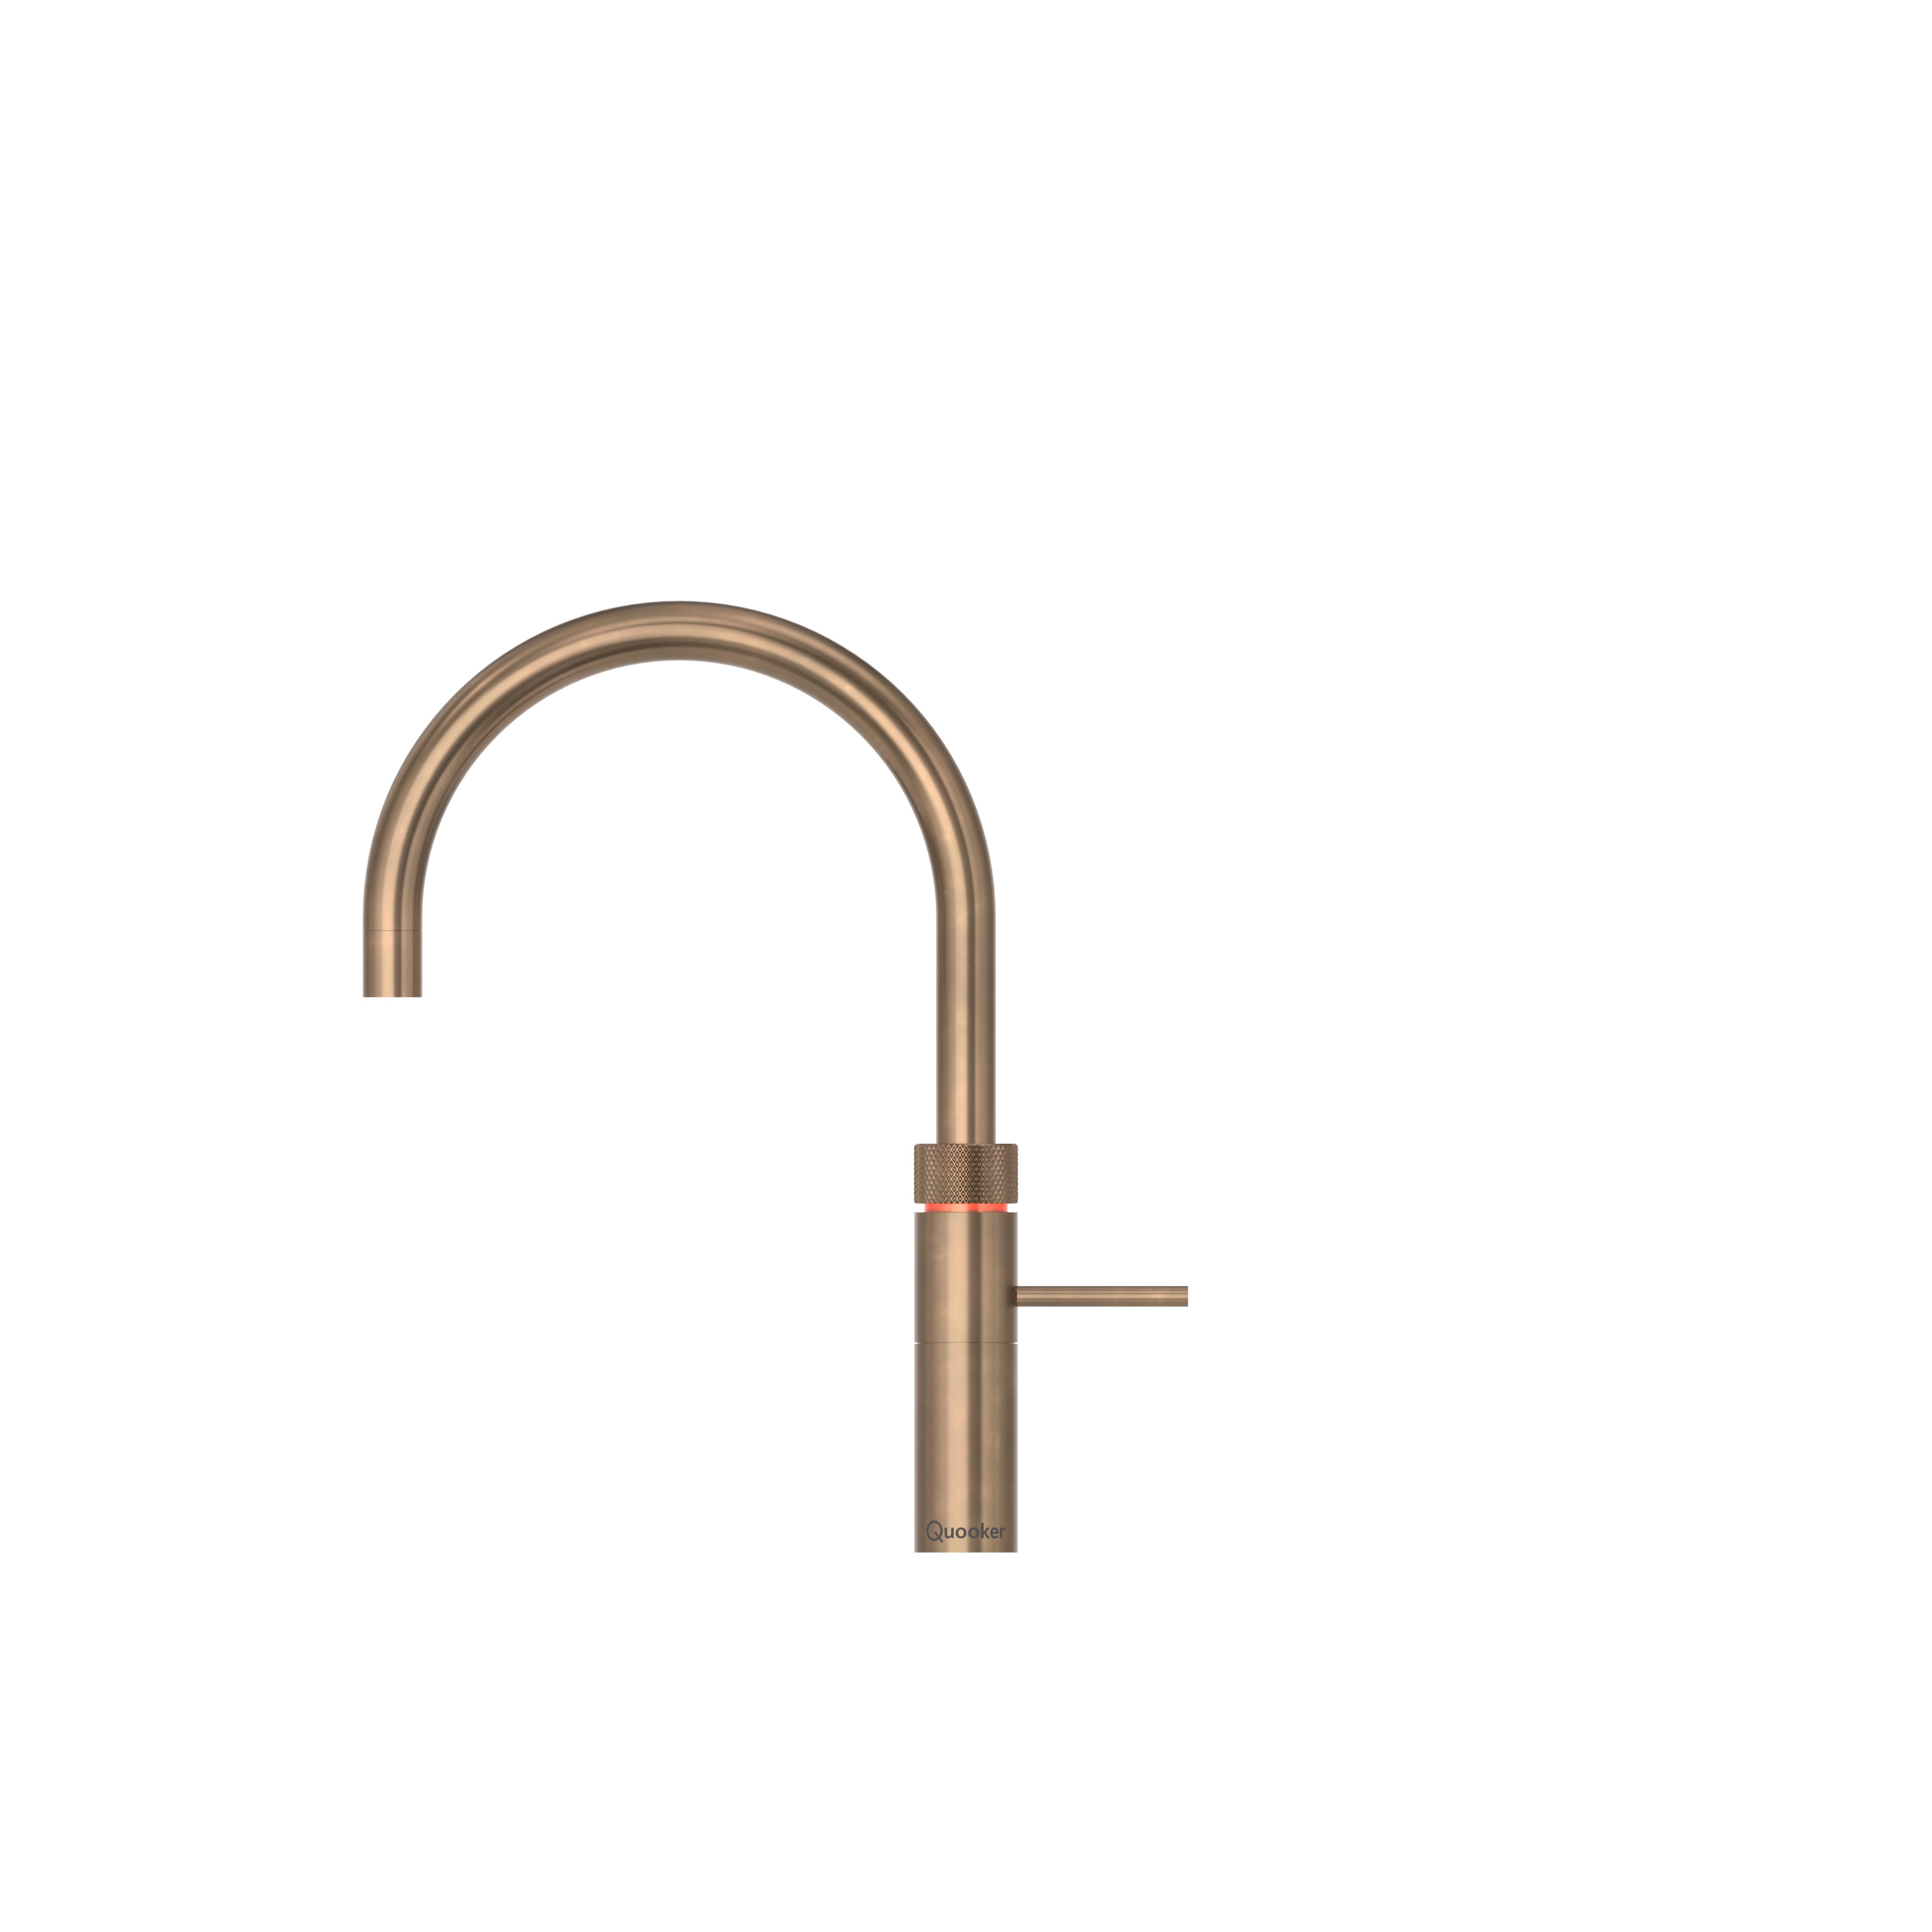 Quooker Fusion Round Tap finished in patinated brass.